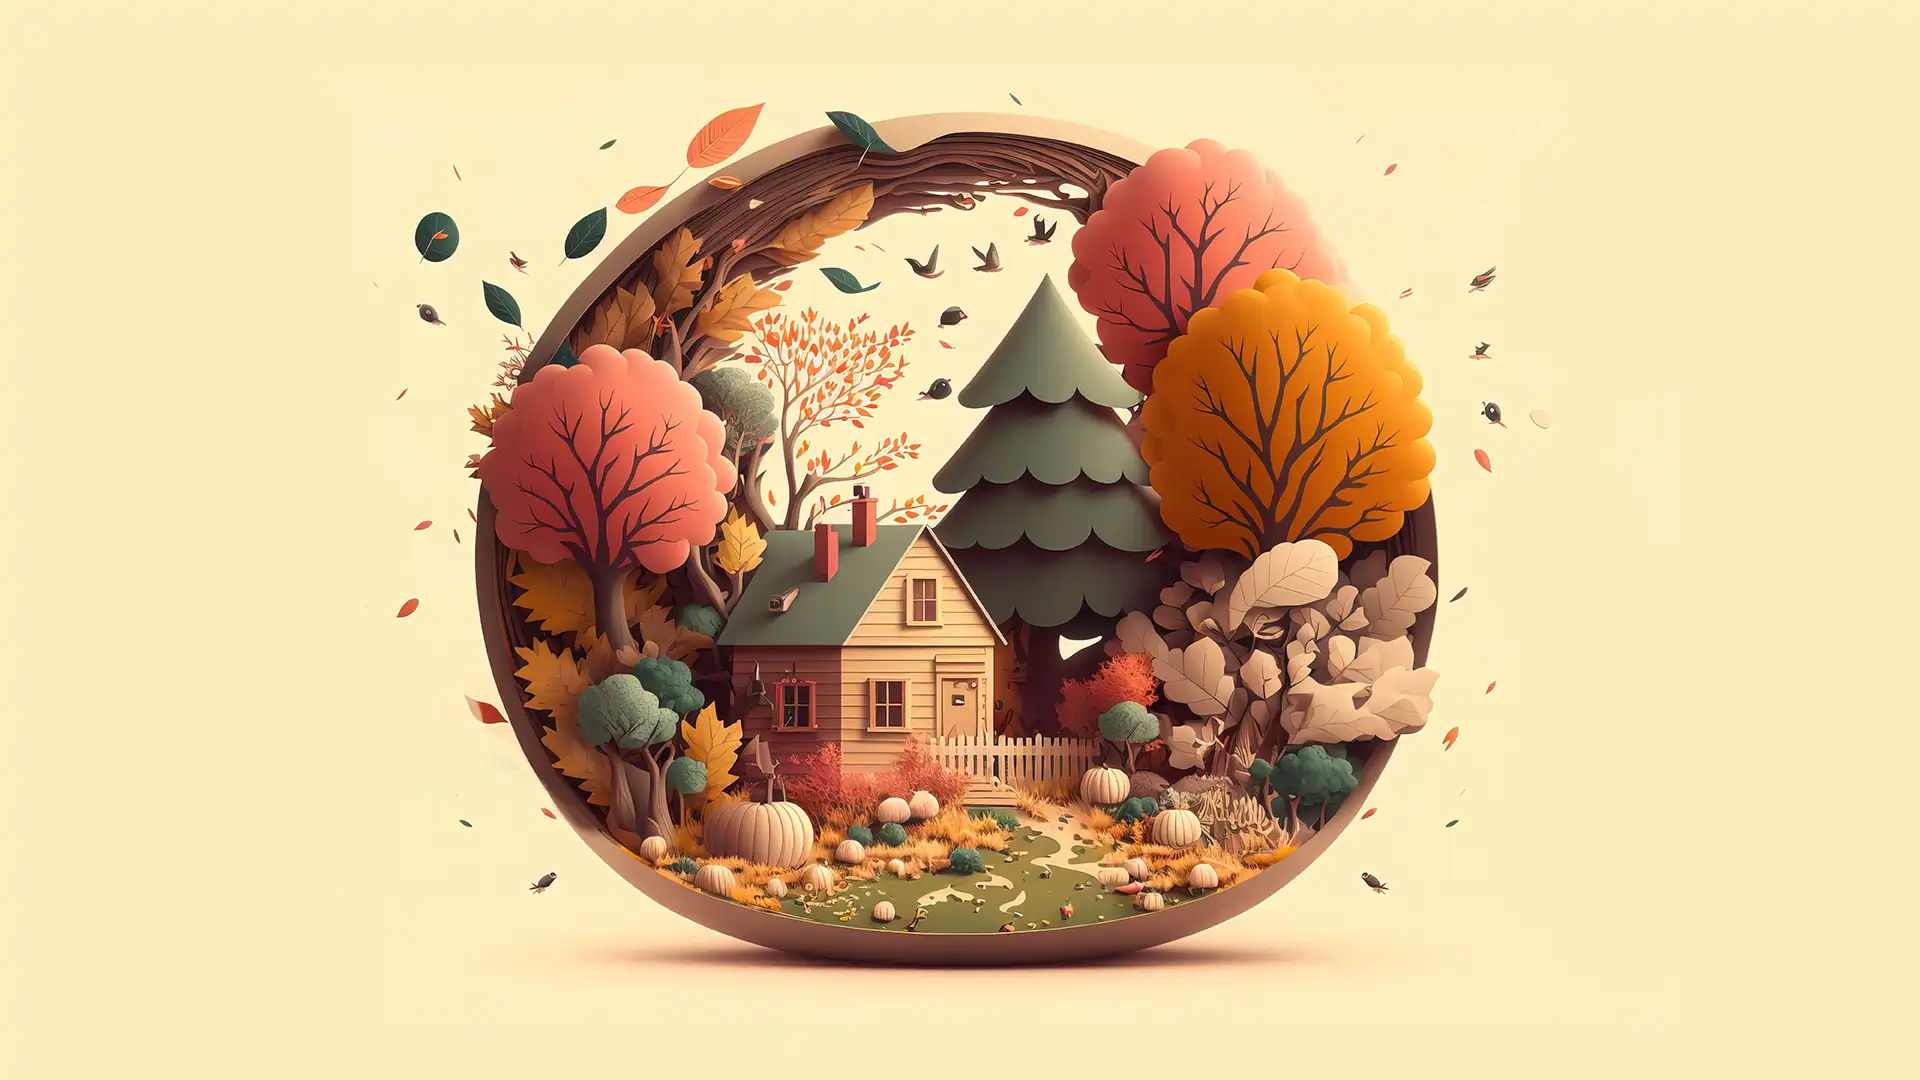 3d render image of house with trees in autumn colors